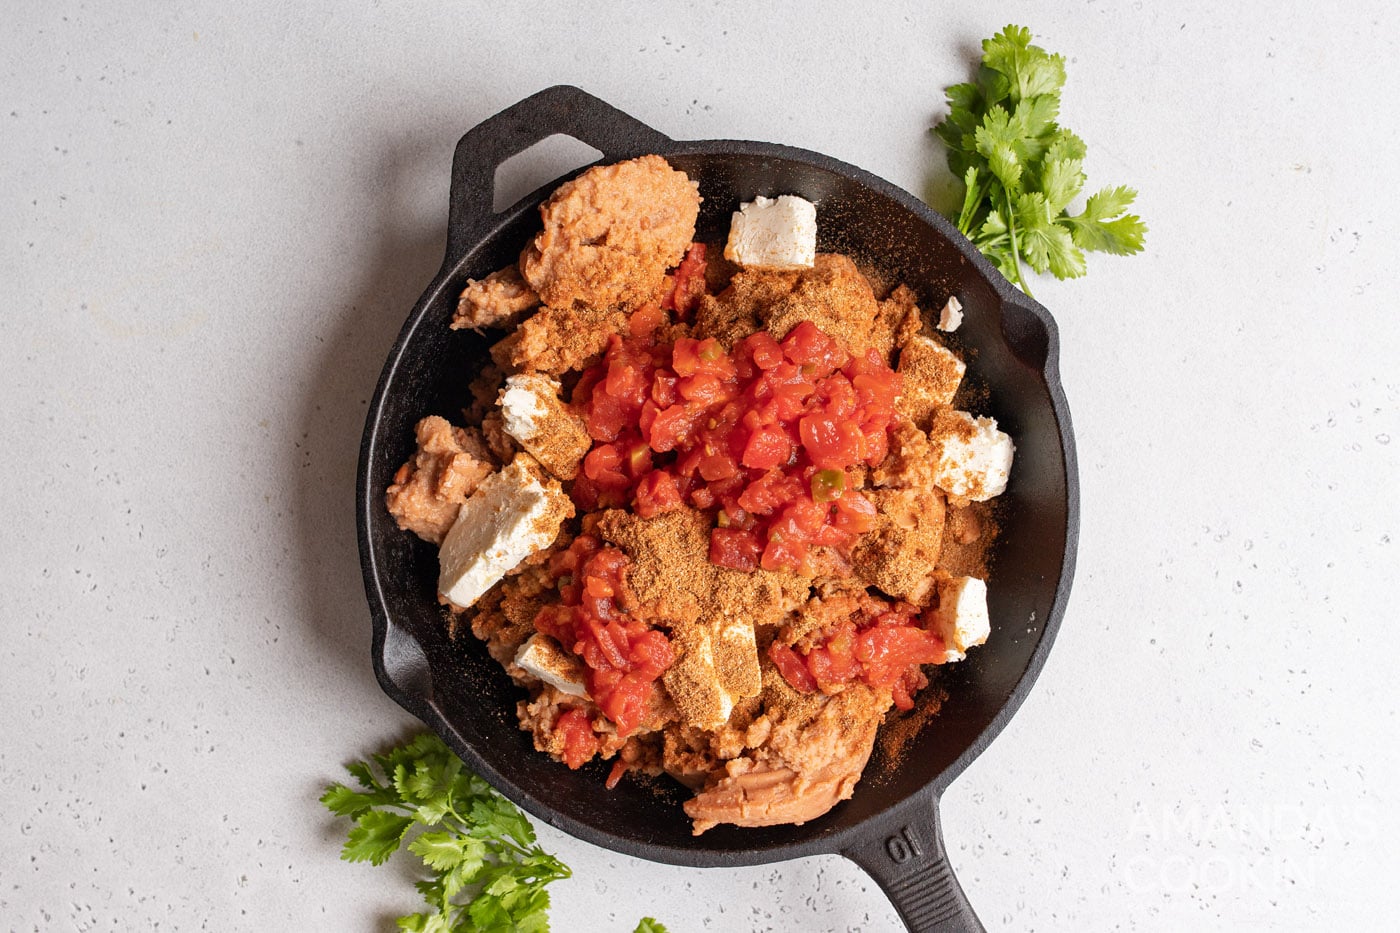 refried beans, tomatoes, cream cheese, and taco seasoning in a skillet 